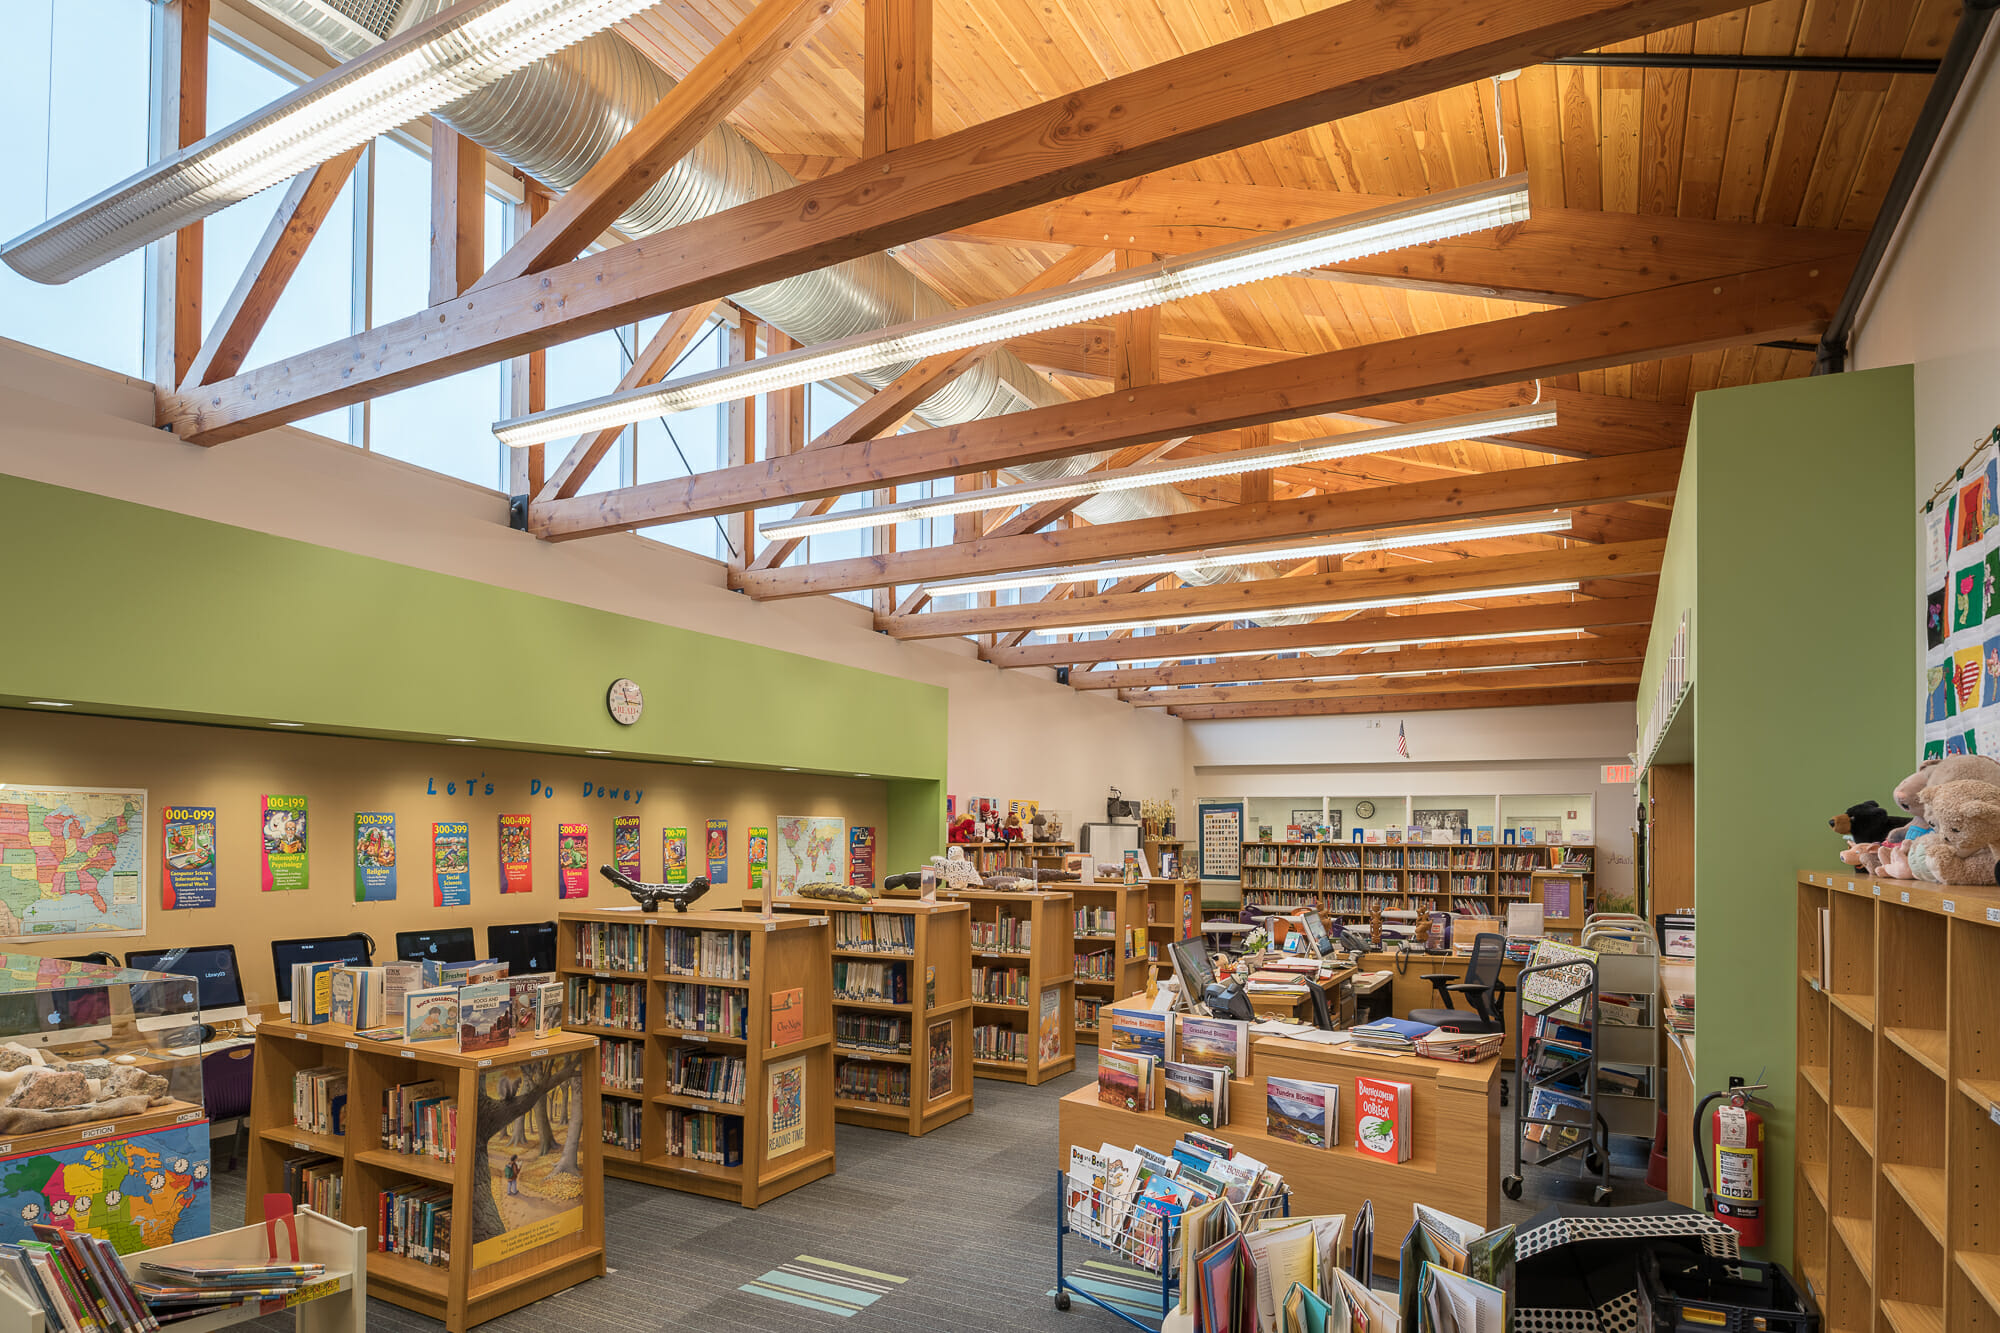 Interior of the Library with Timber Trusses in the Rippowam Cisqua School in NY.